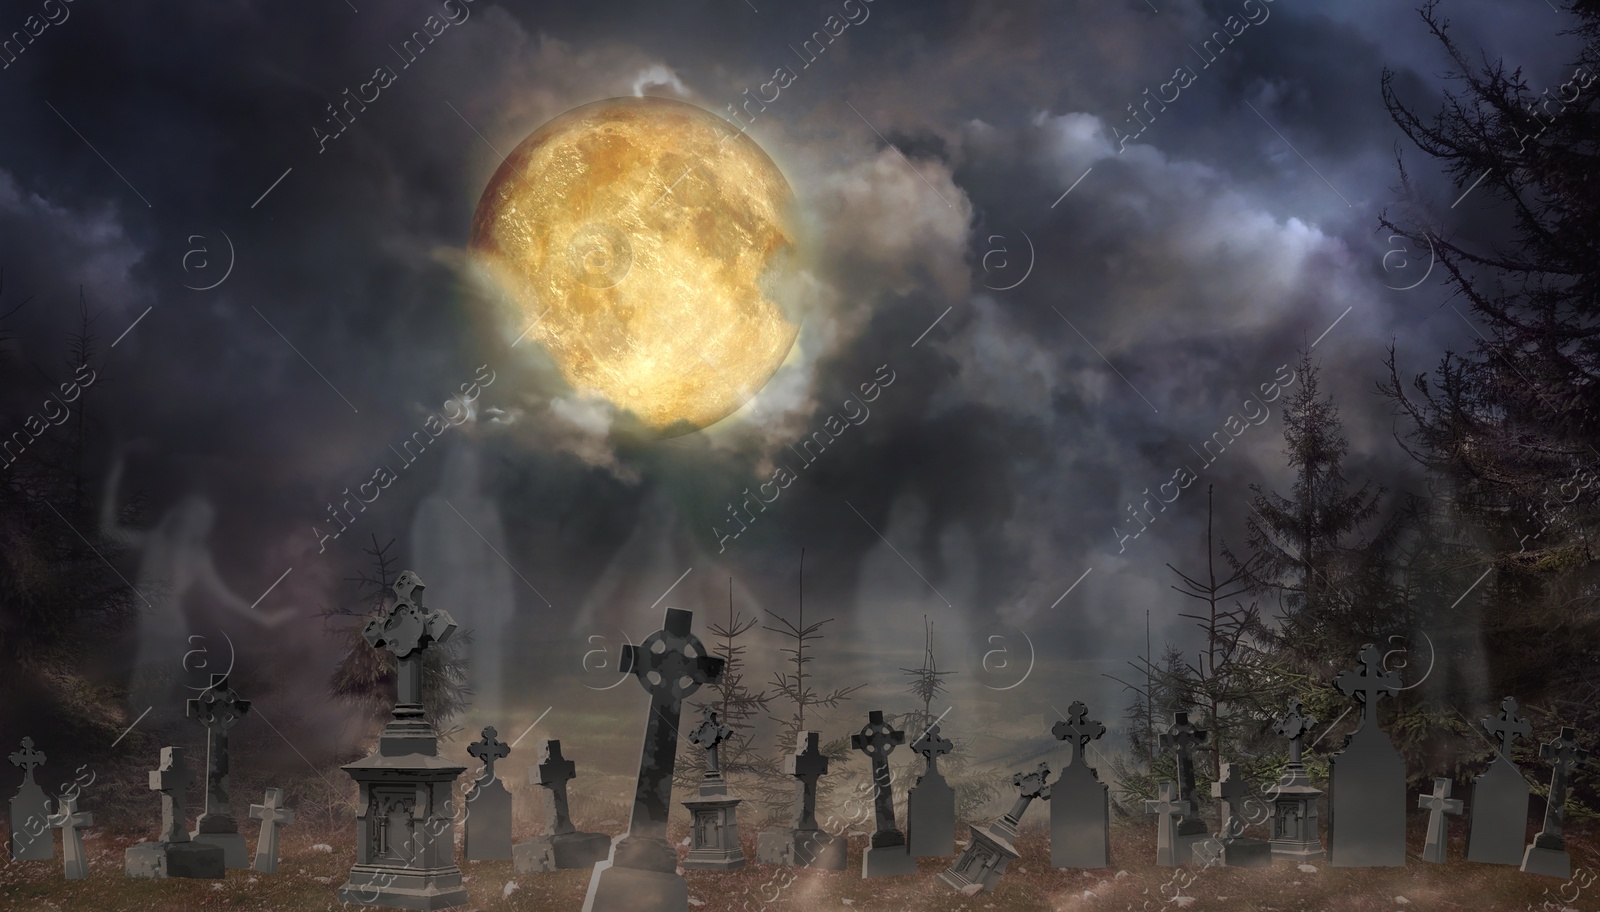 Image of Ghosts rising from their graves with creepy headstones at old cemetery on Halloween